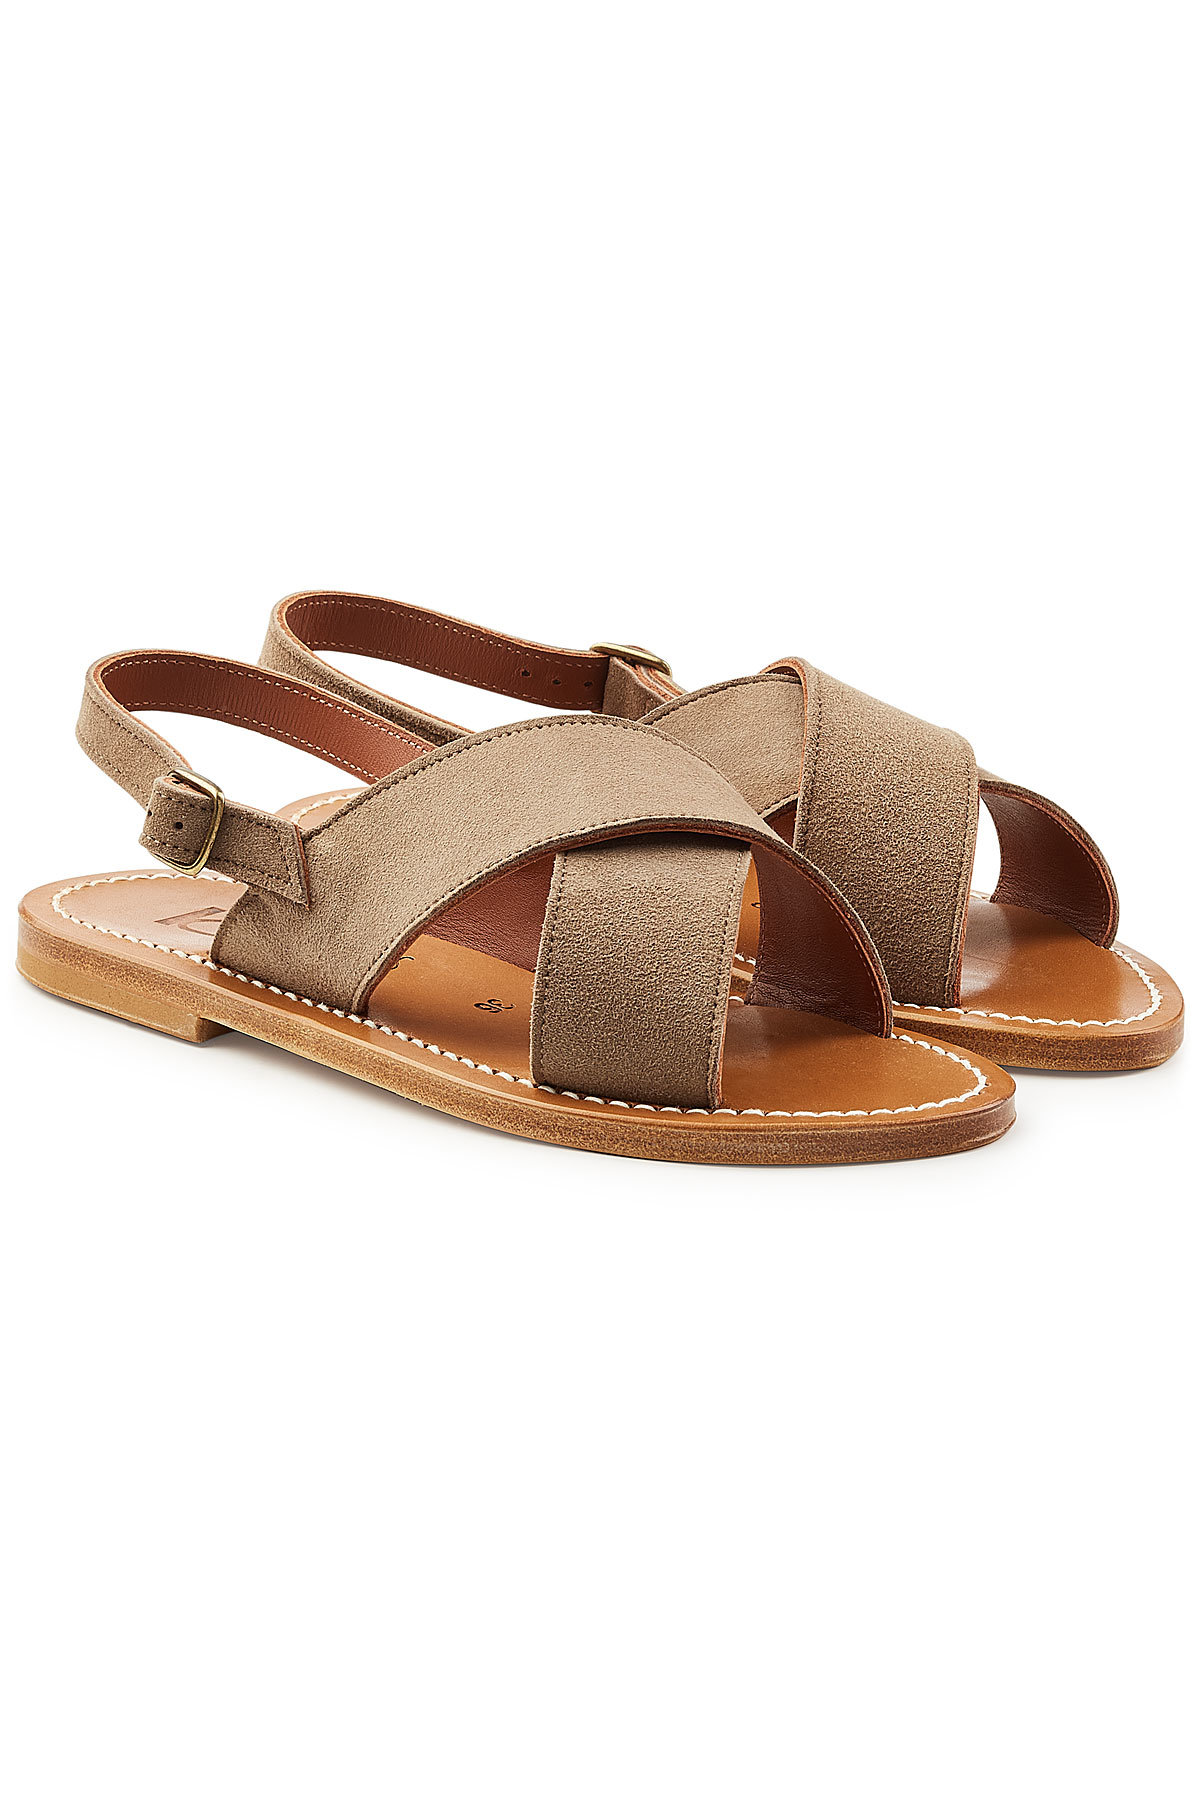 K.Jacques - Osorno Suede Sandals